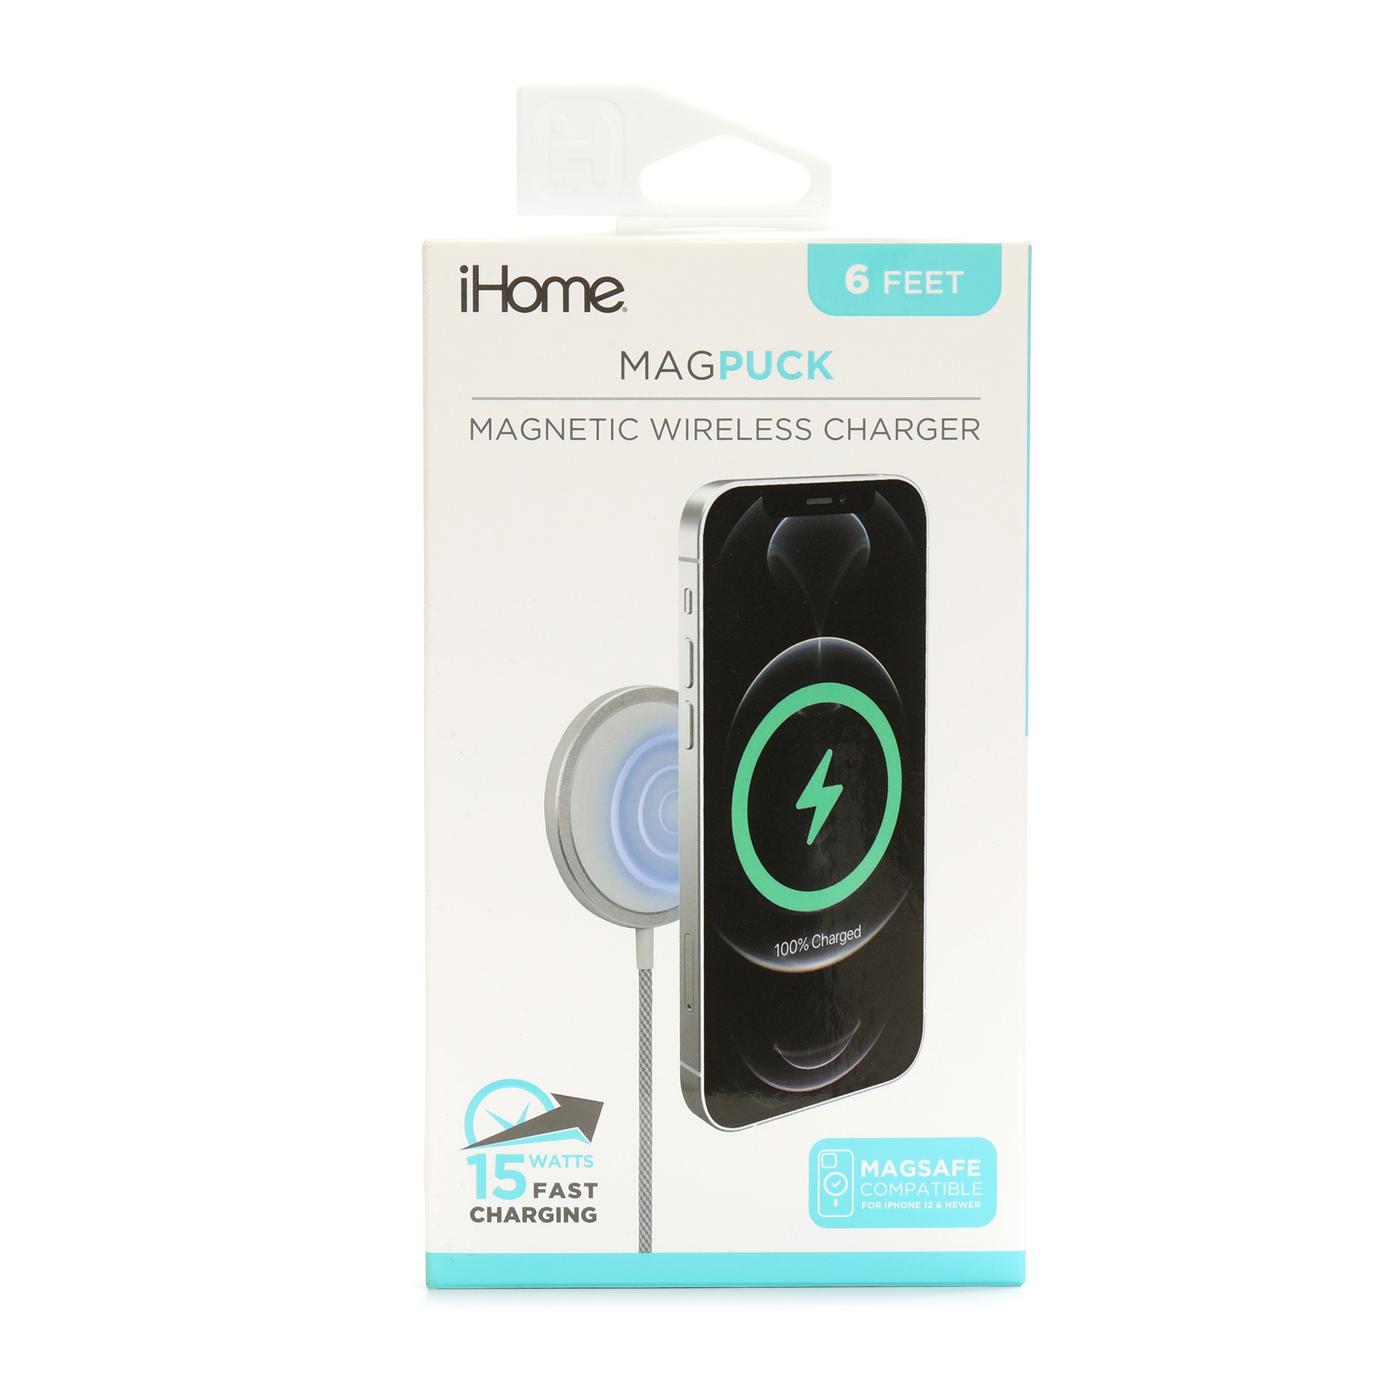 iHome MagPuck Magnetic Wireless Charger - White; image 1 of 2